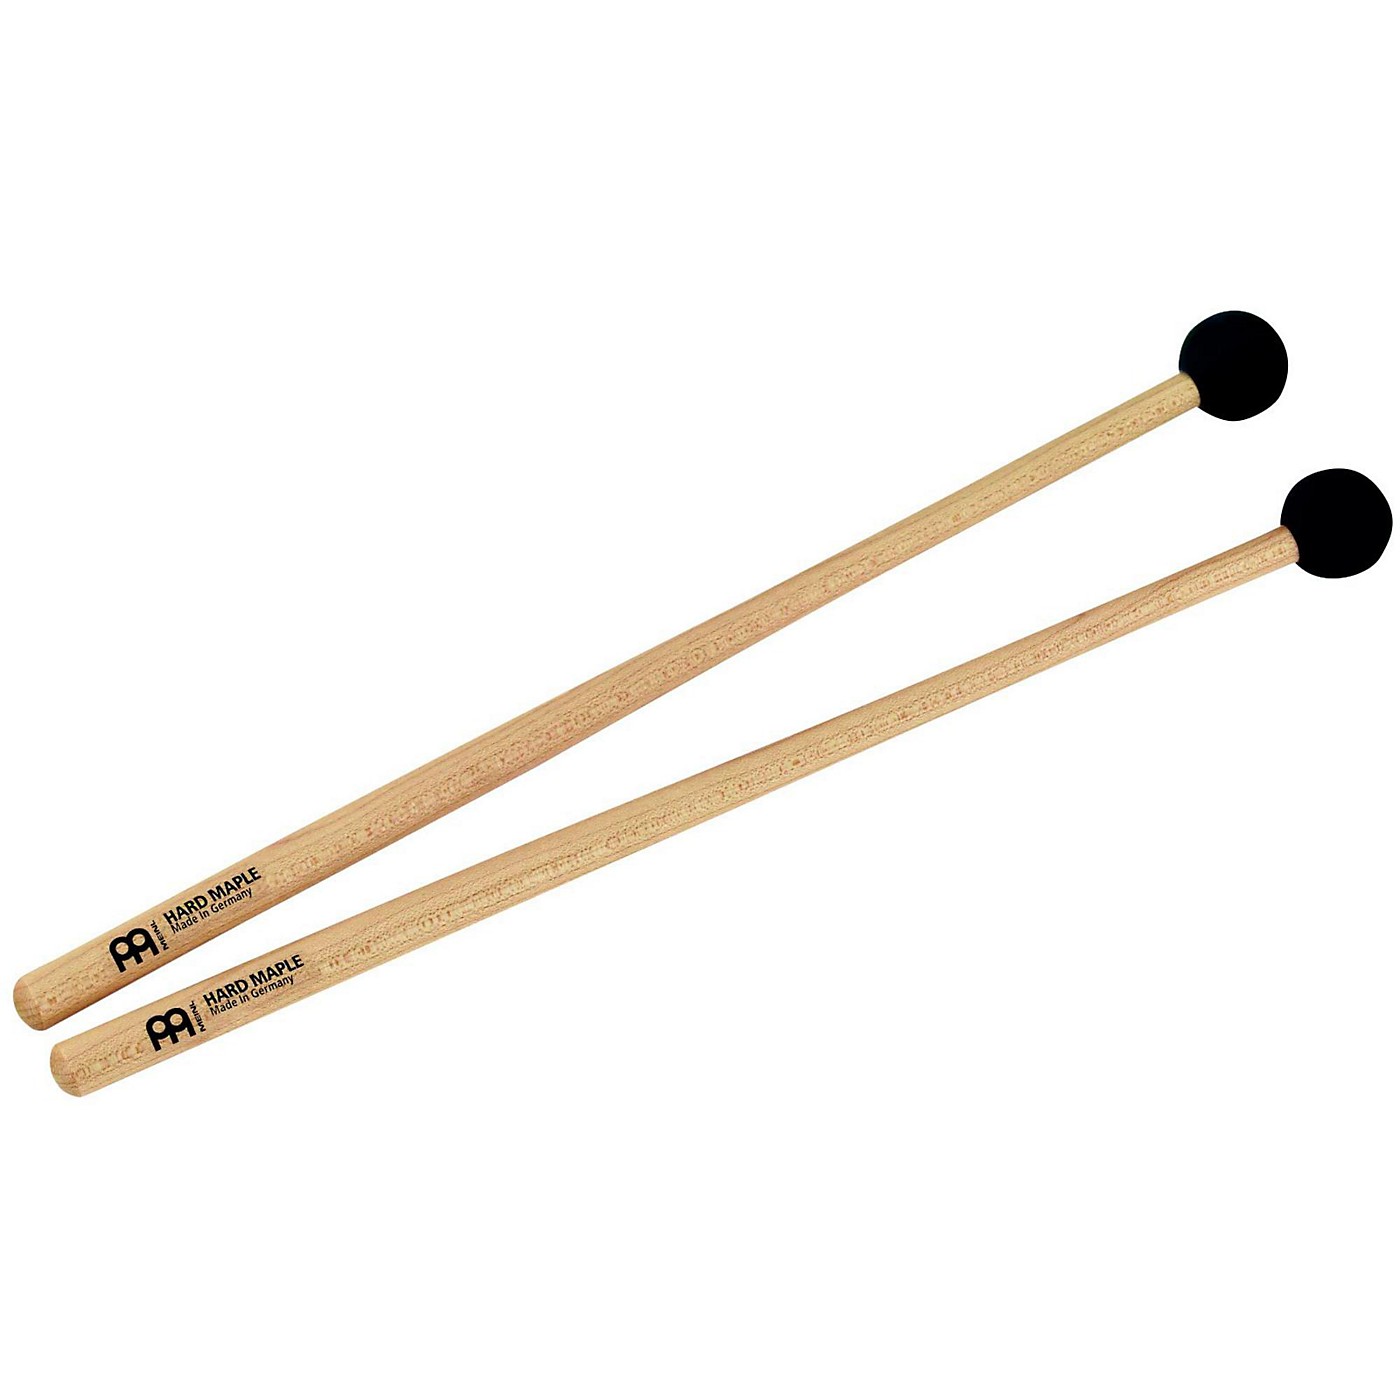 MEINL Percussion Mallet Pair with Rubber Tips thumbnail